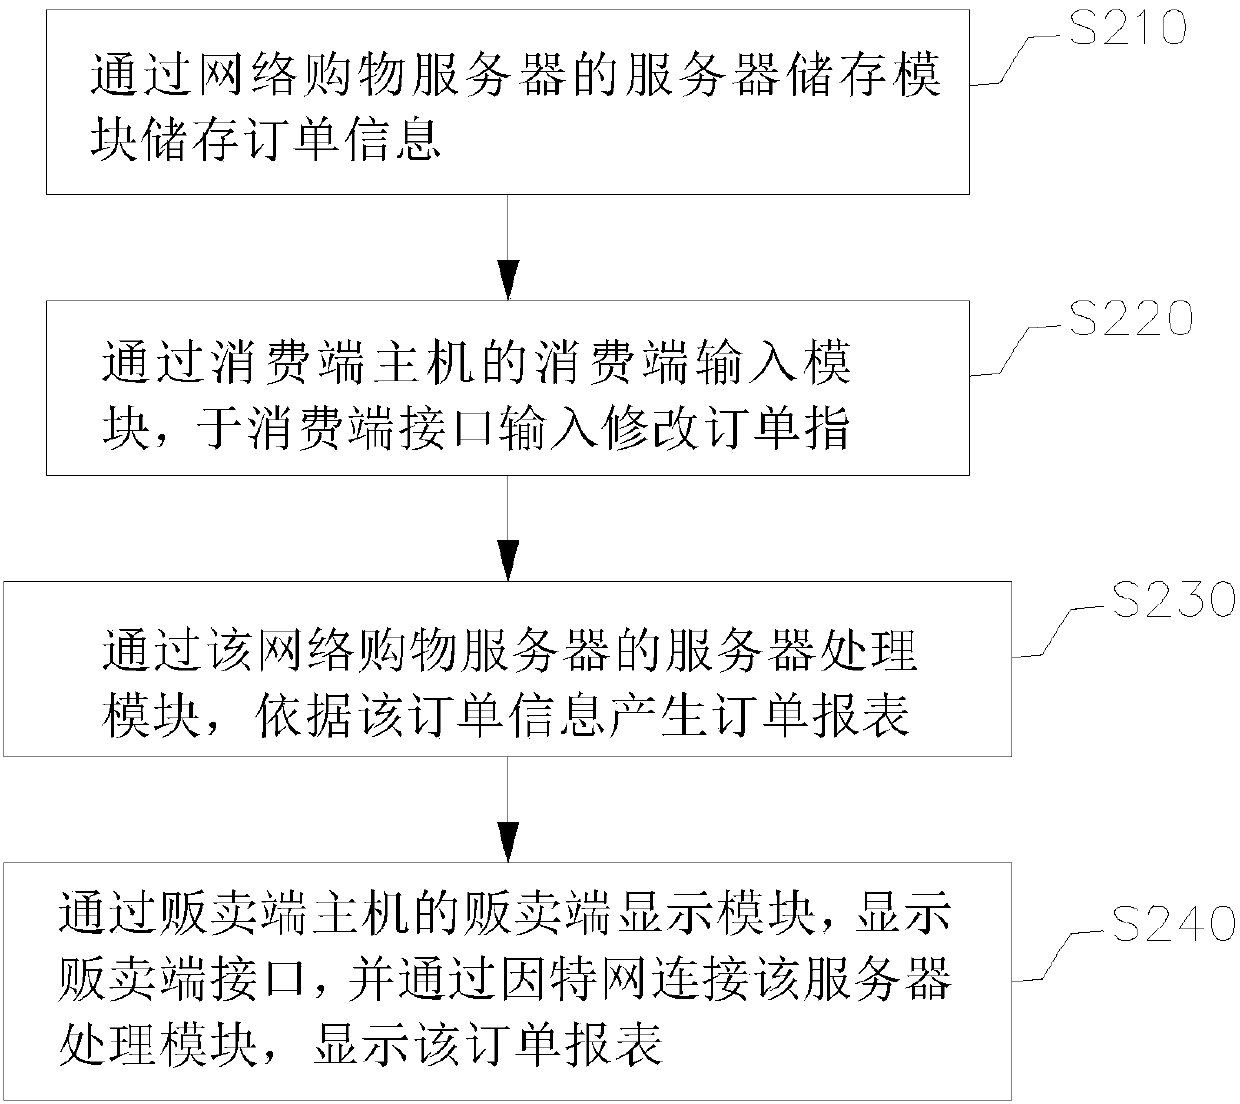 Online shopping order modification system and method